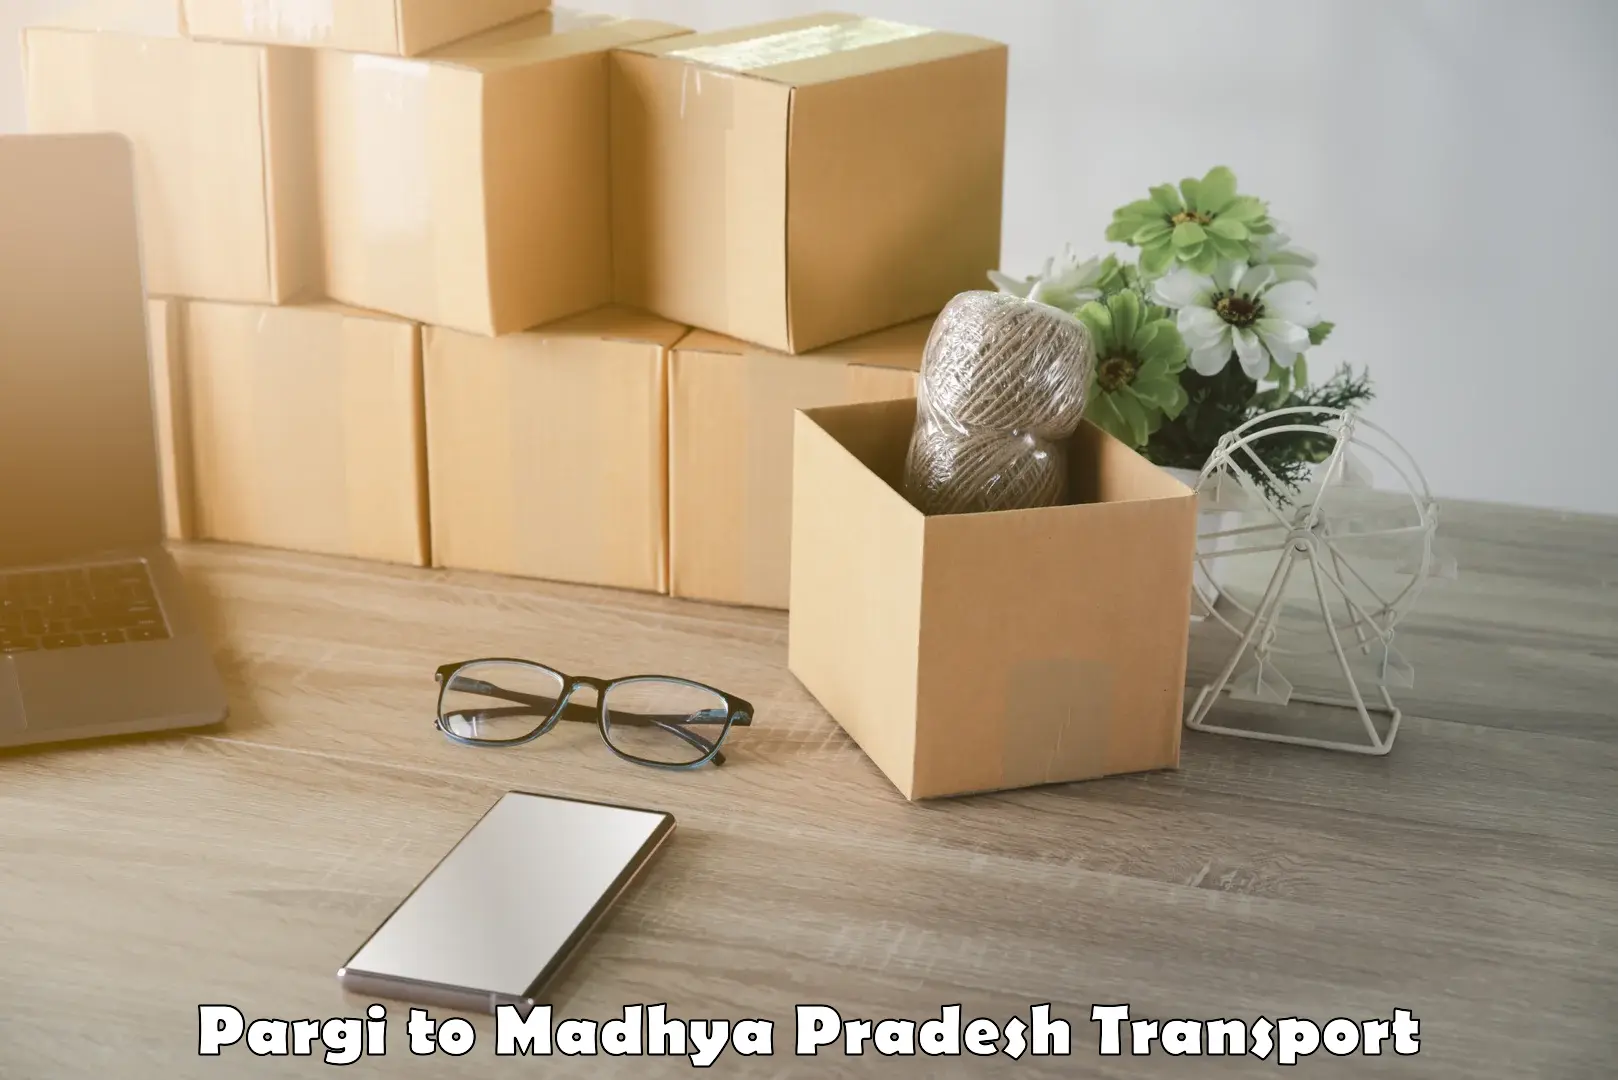 Package delivery services Pargi to Rampur Naikin